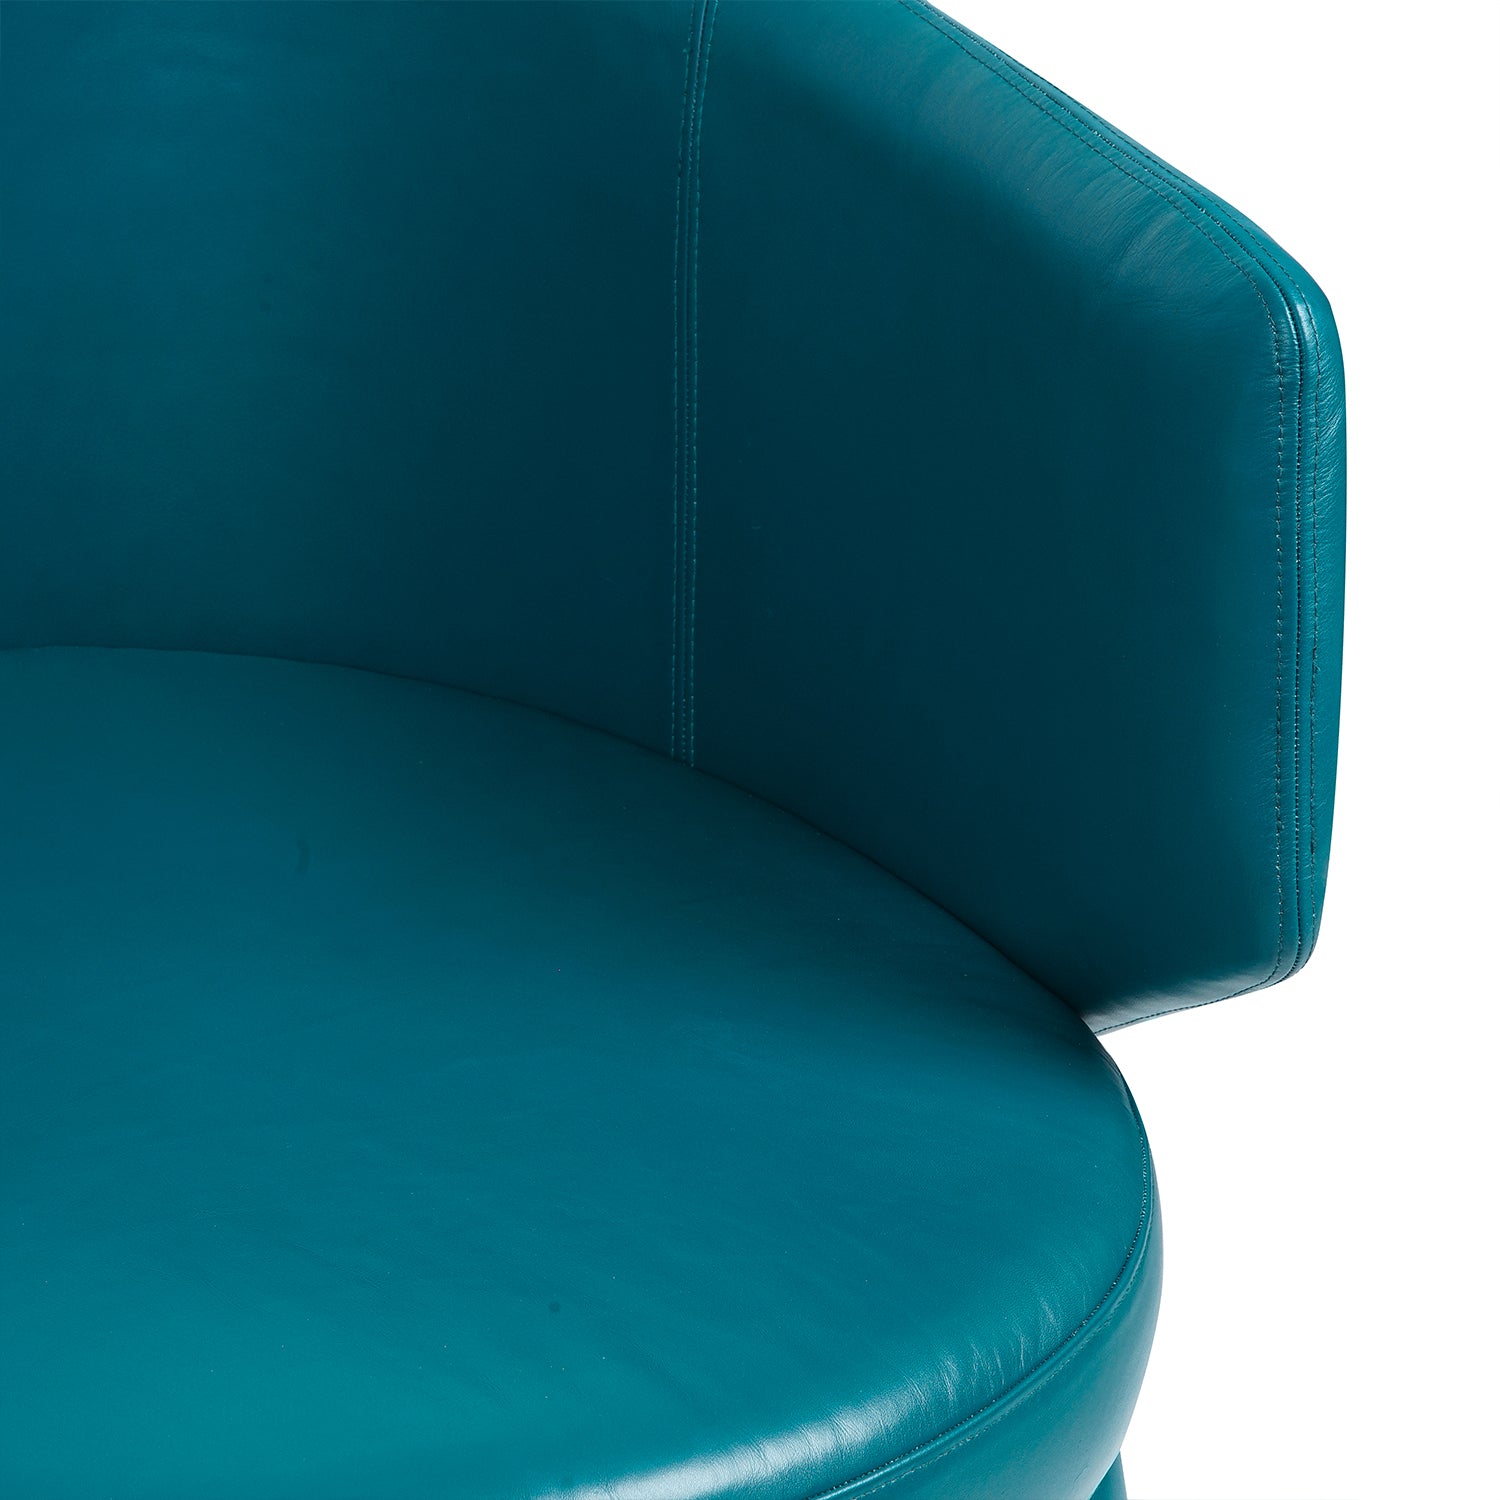 Juliet Sapi Leather Chair Teal Round Back Close Up